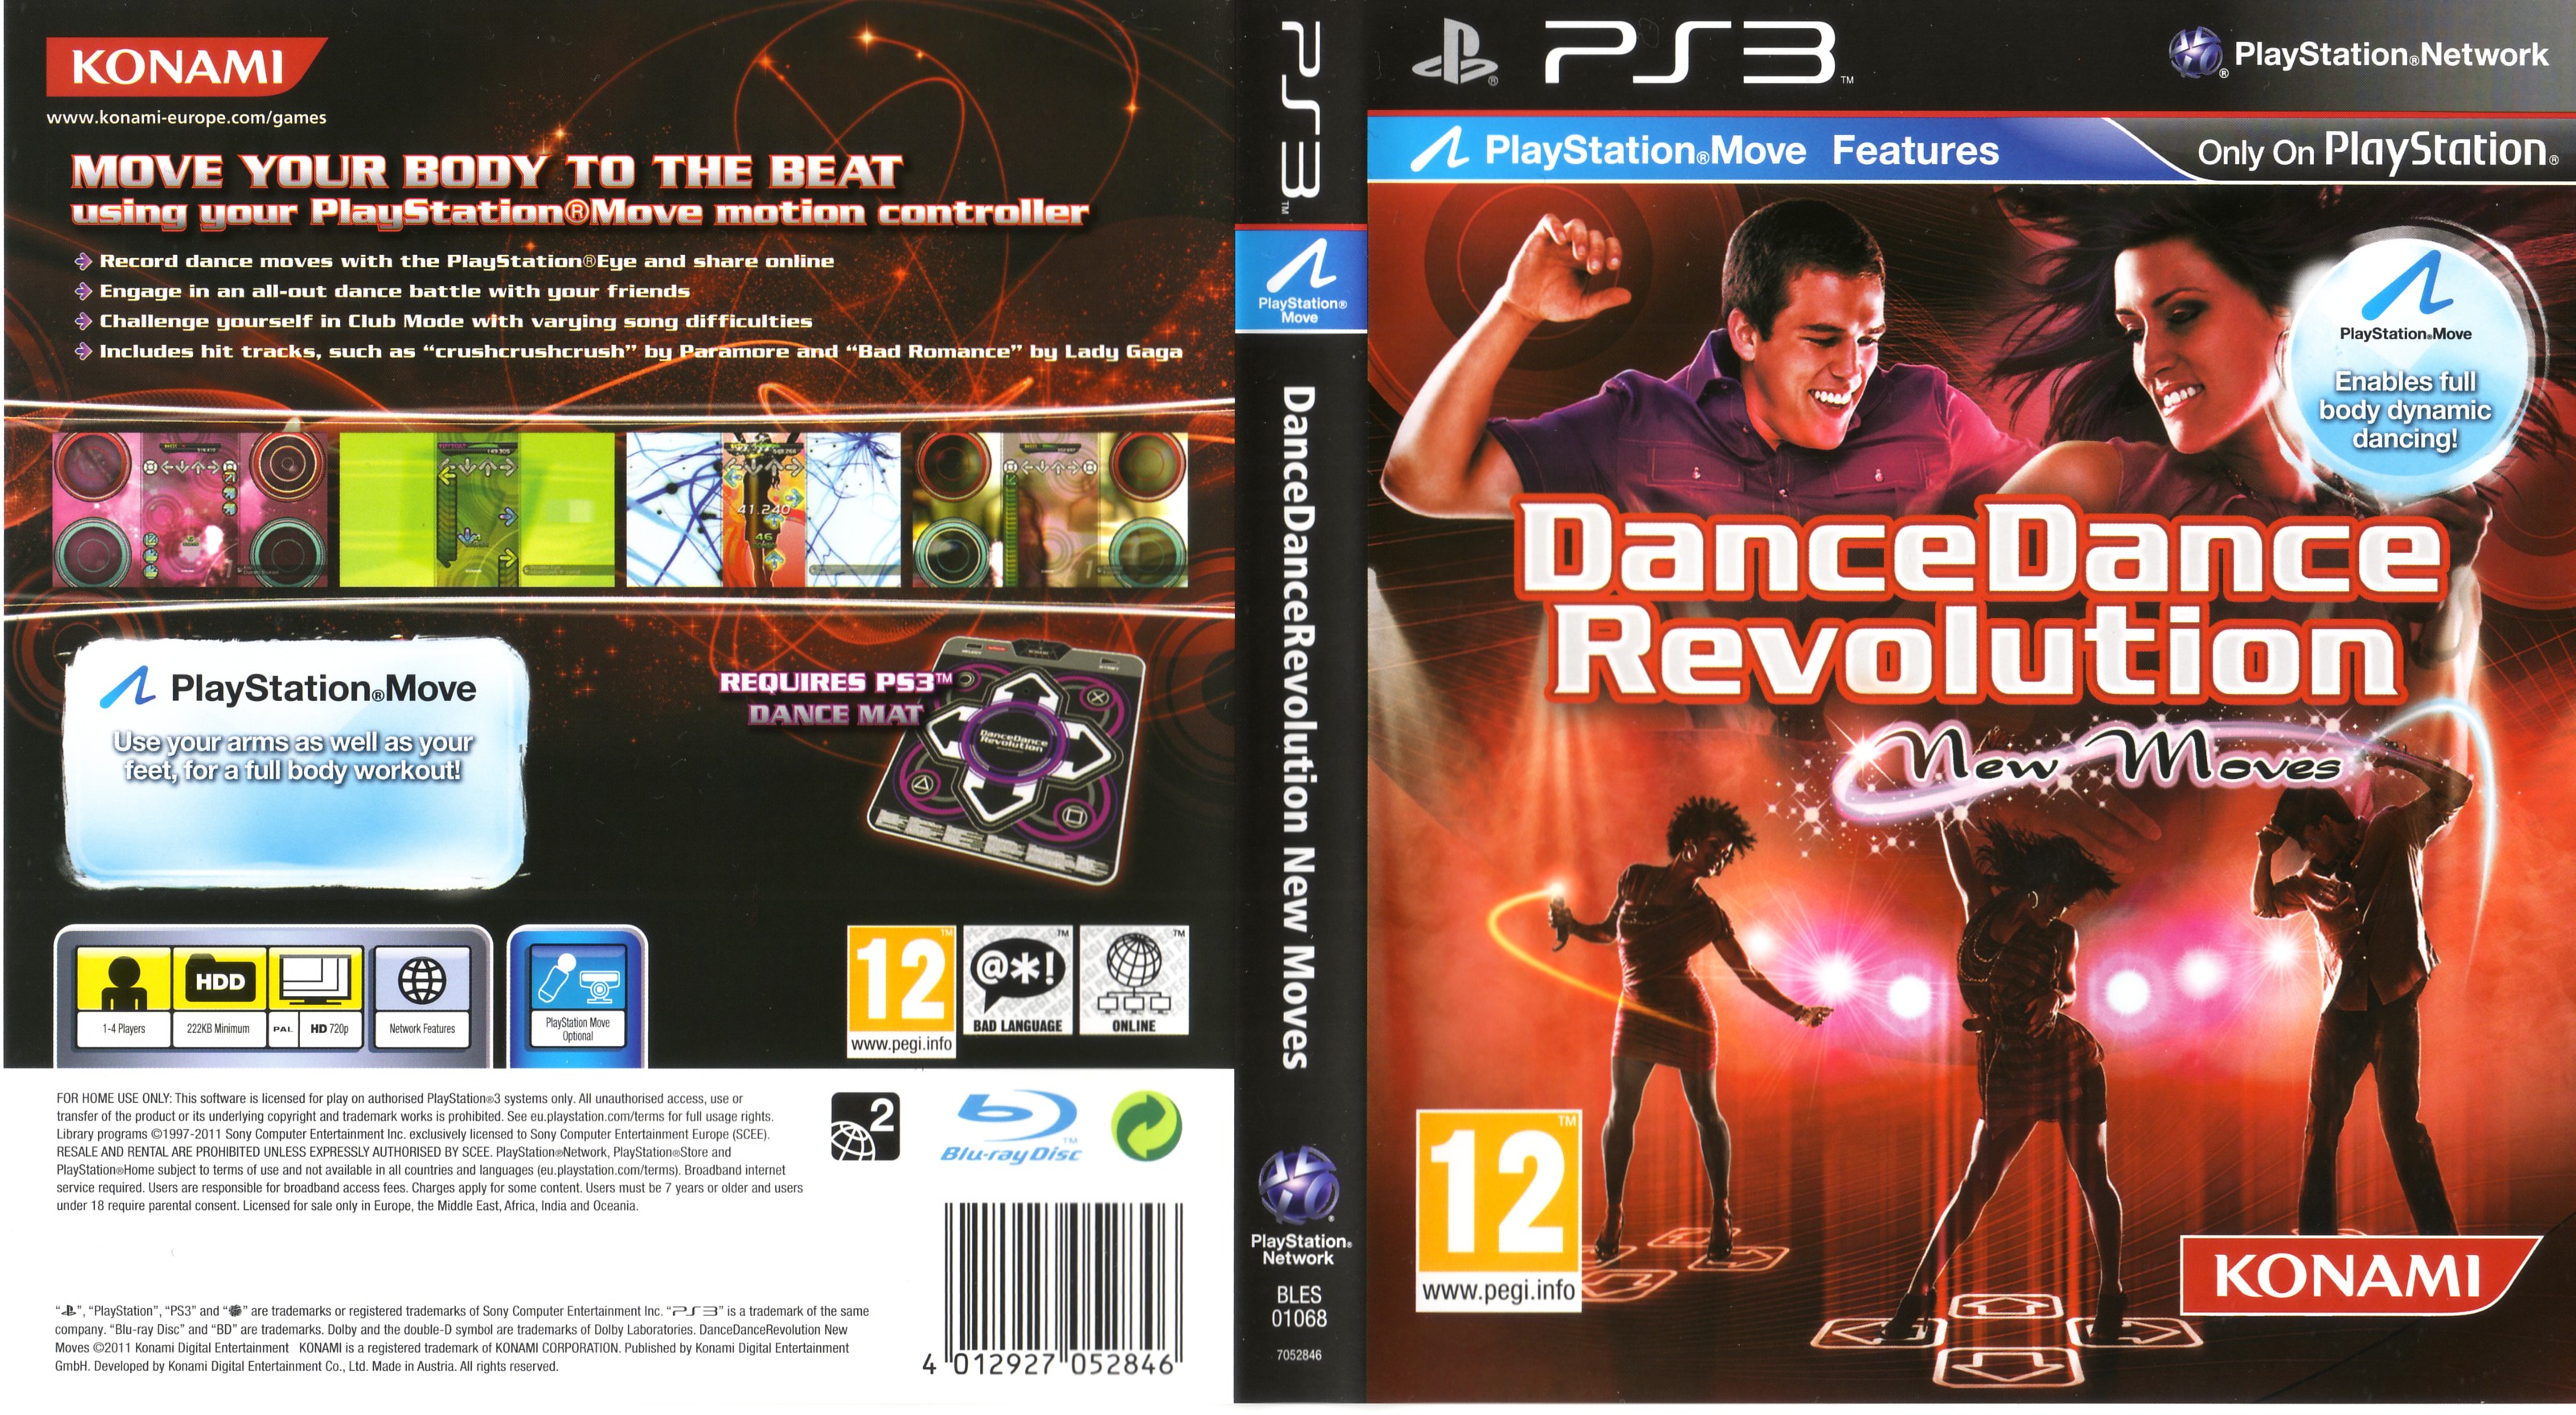 DDR New Moves Cover - DanceDanceRevolution - Games - Picture Gallery - ZIv